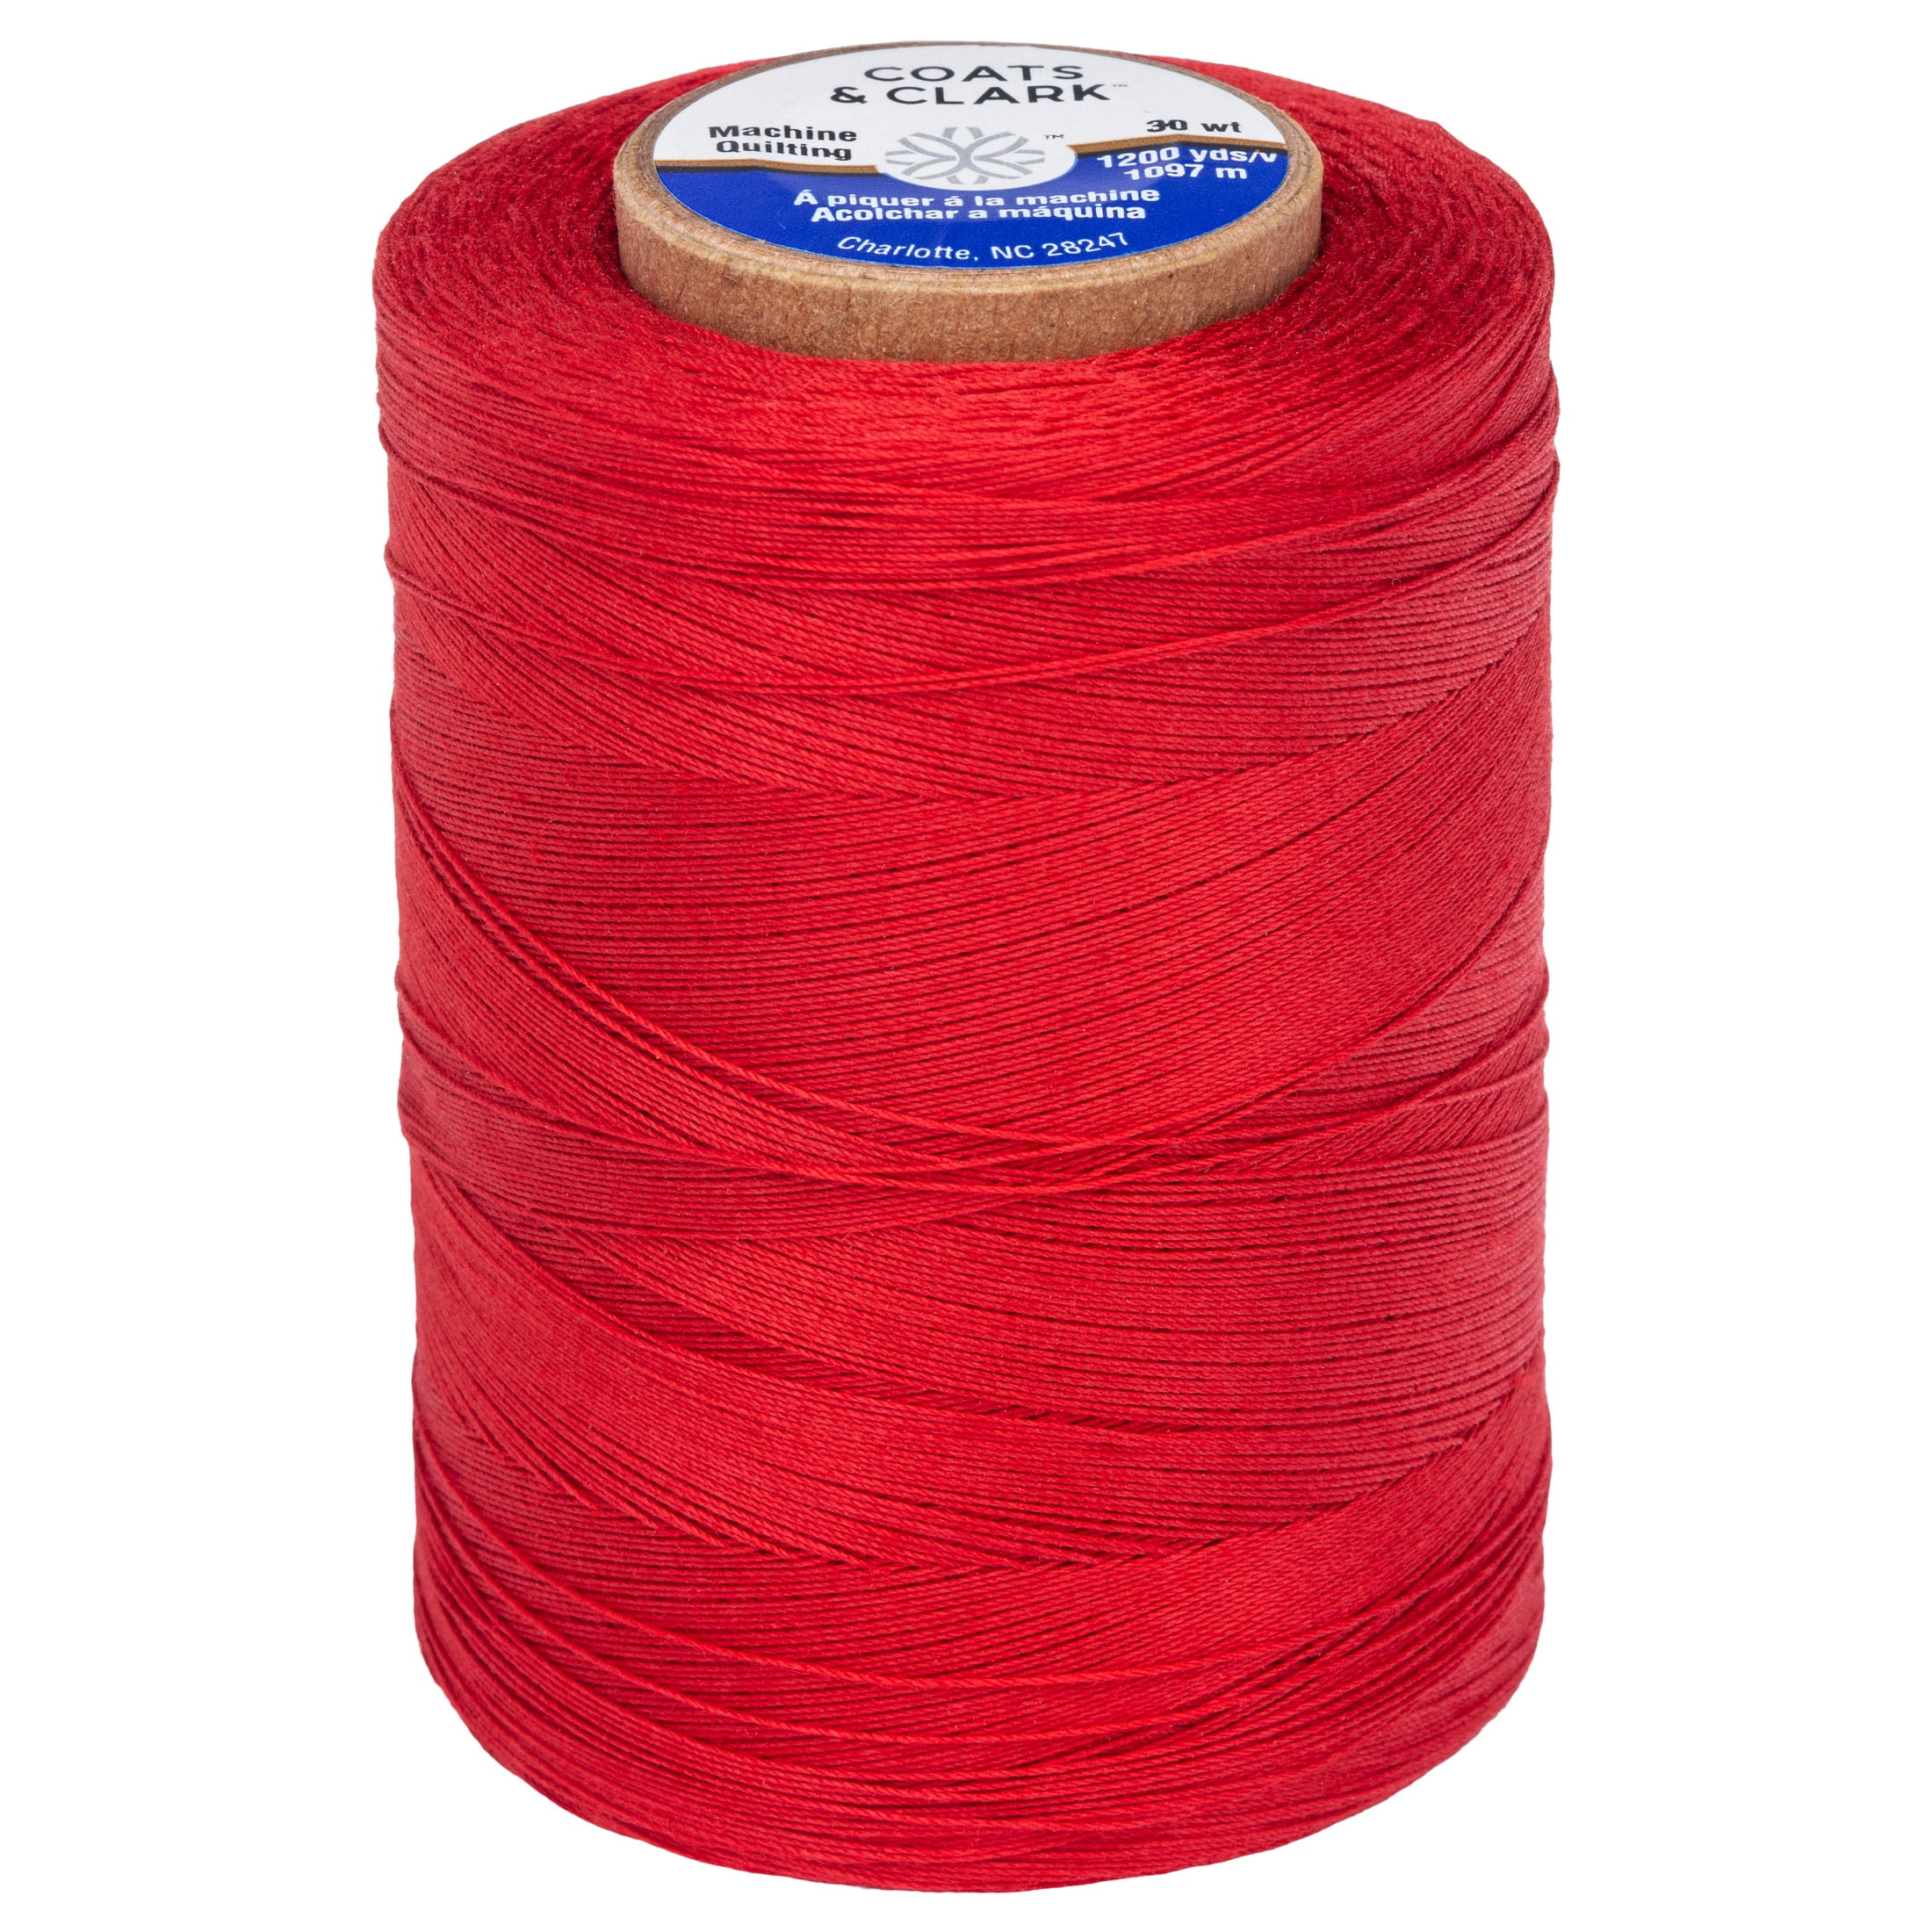 Thread Bundle-15 Items 3 Thread Serger Red/Blue 3 each of 5 Colors Primary 